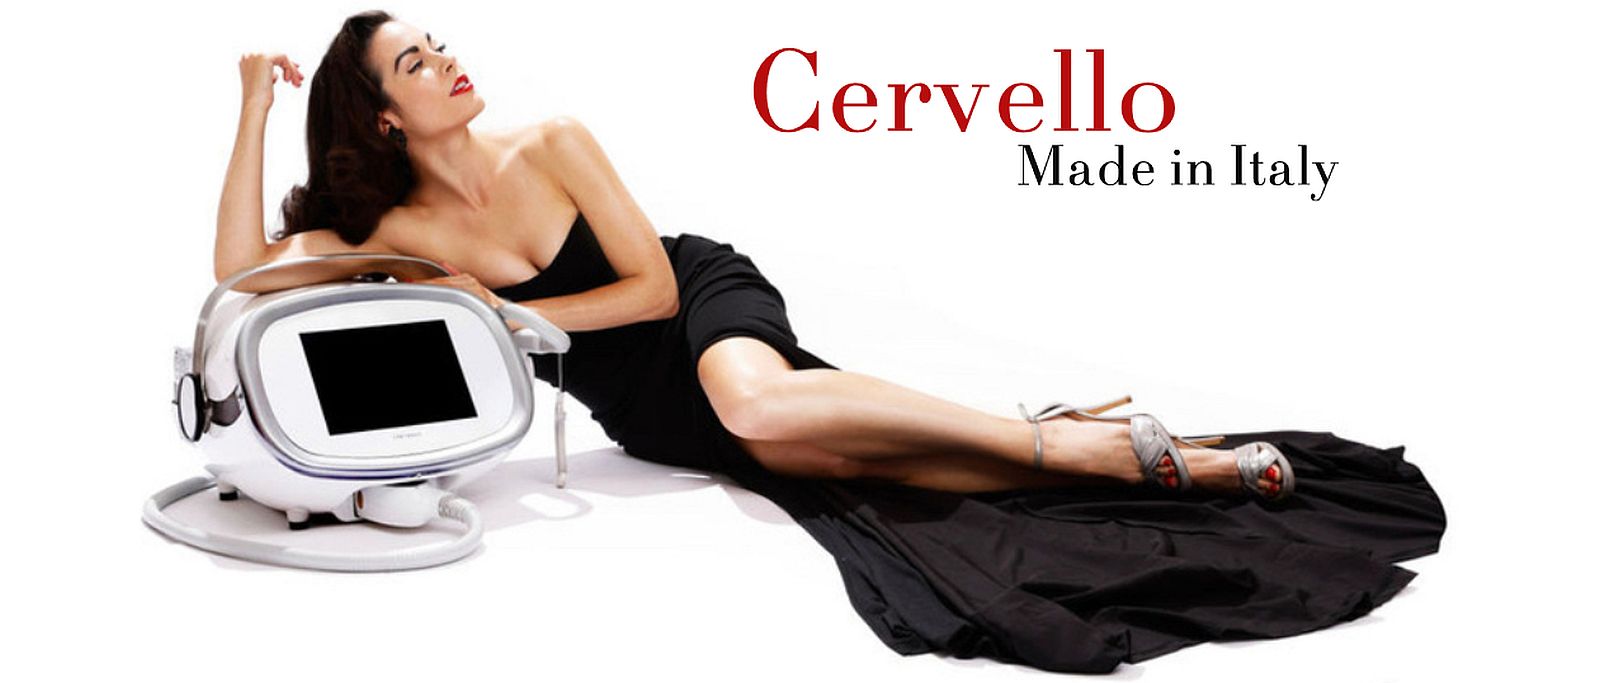 Laser permanent hair reduction removal by Cervello Laser